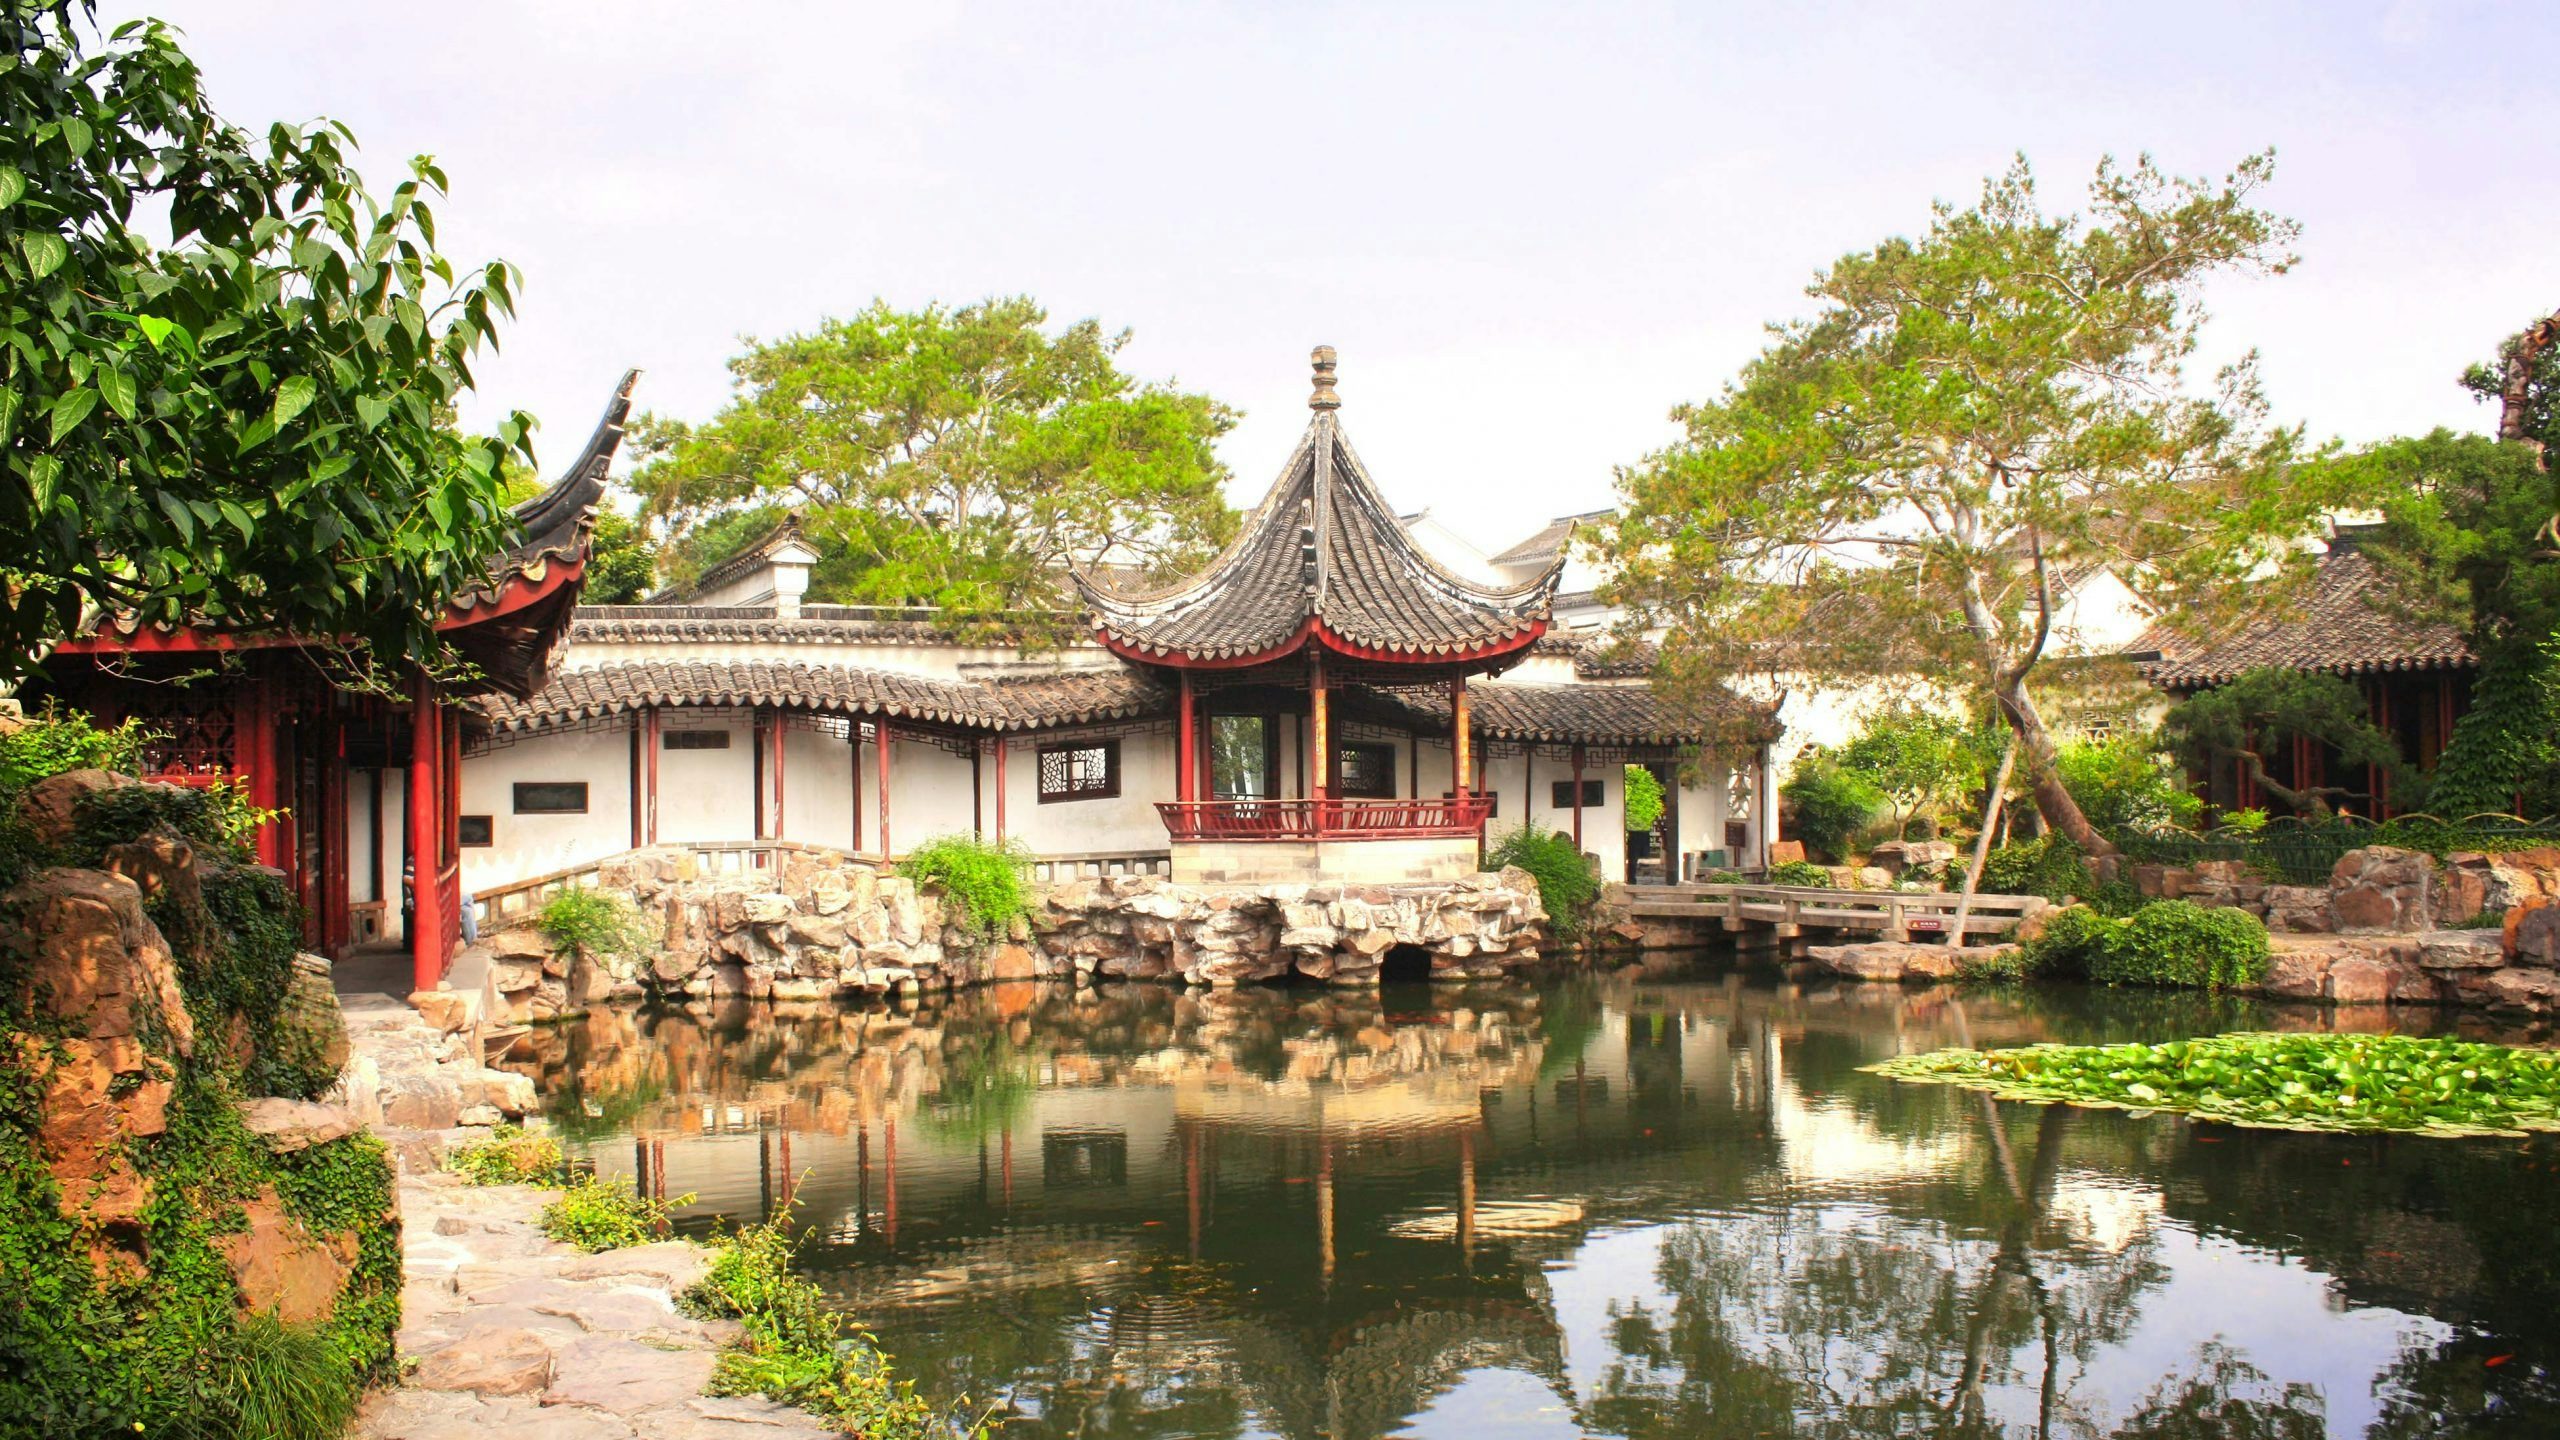 The City Of Gardens: Is Suzhou Luxury’s Next Opportunity?